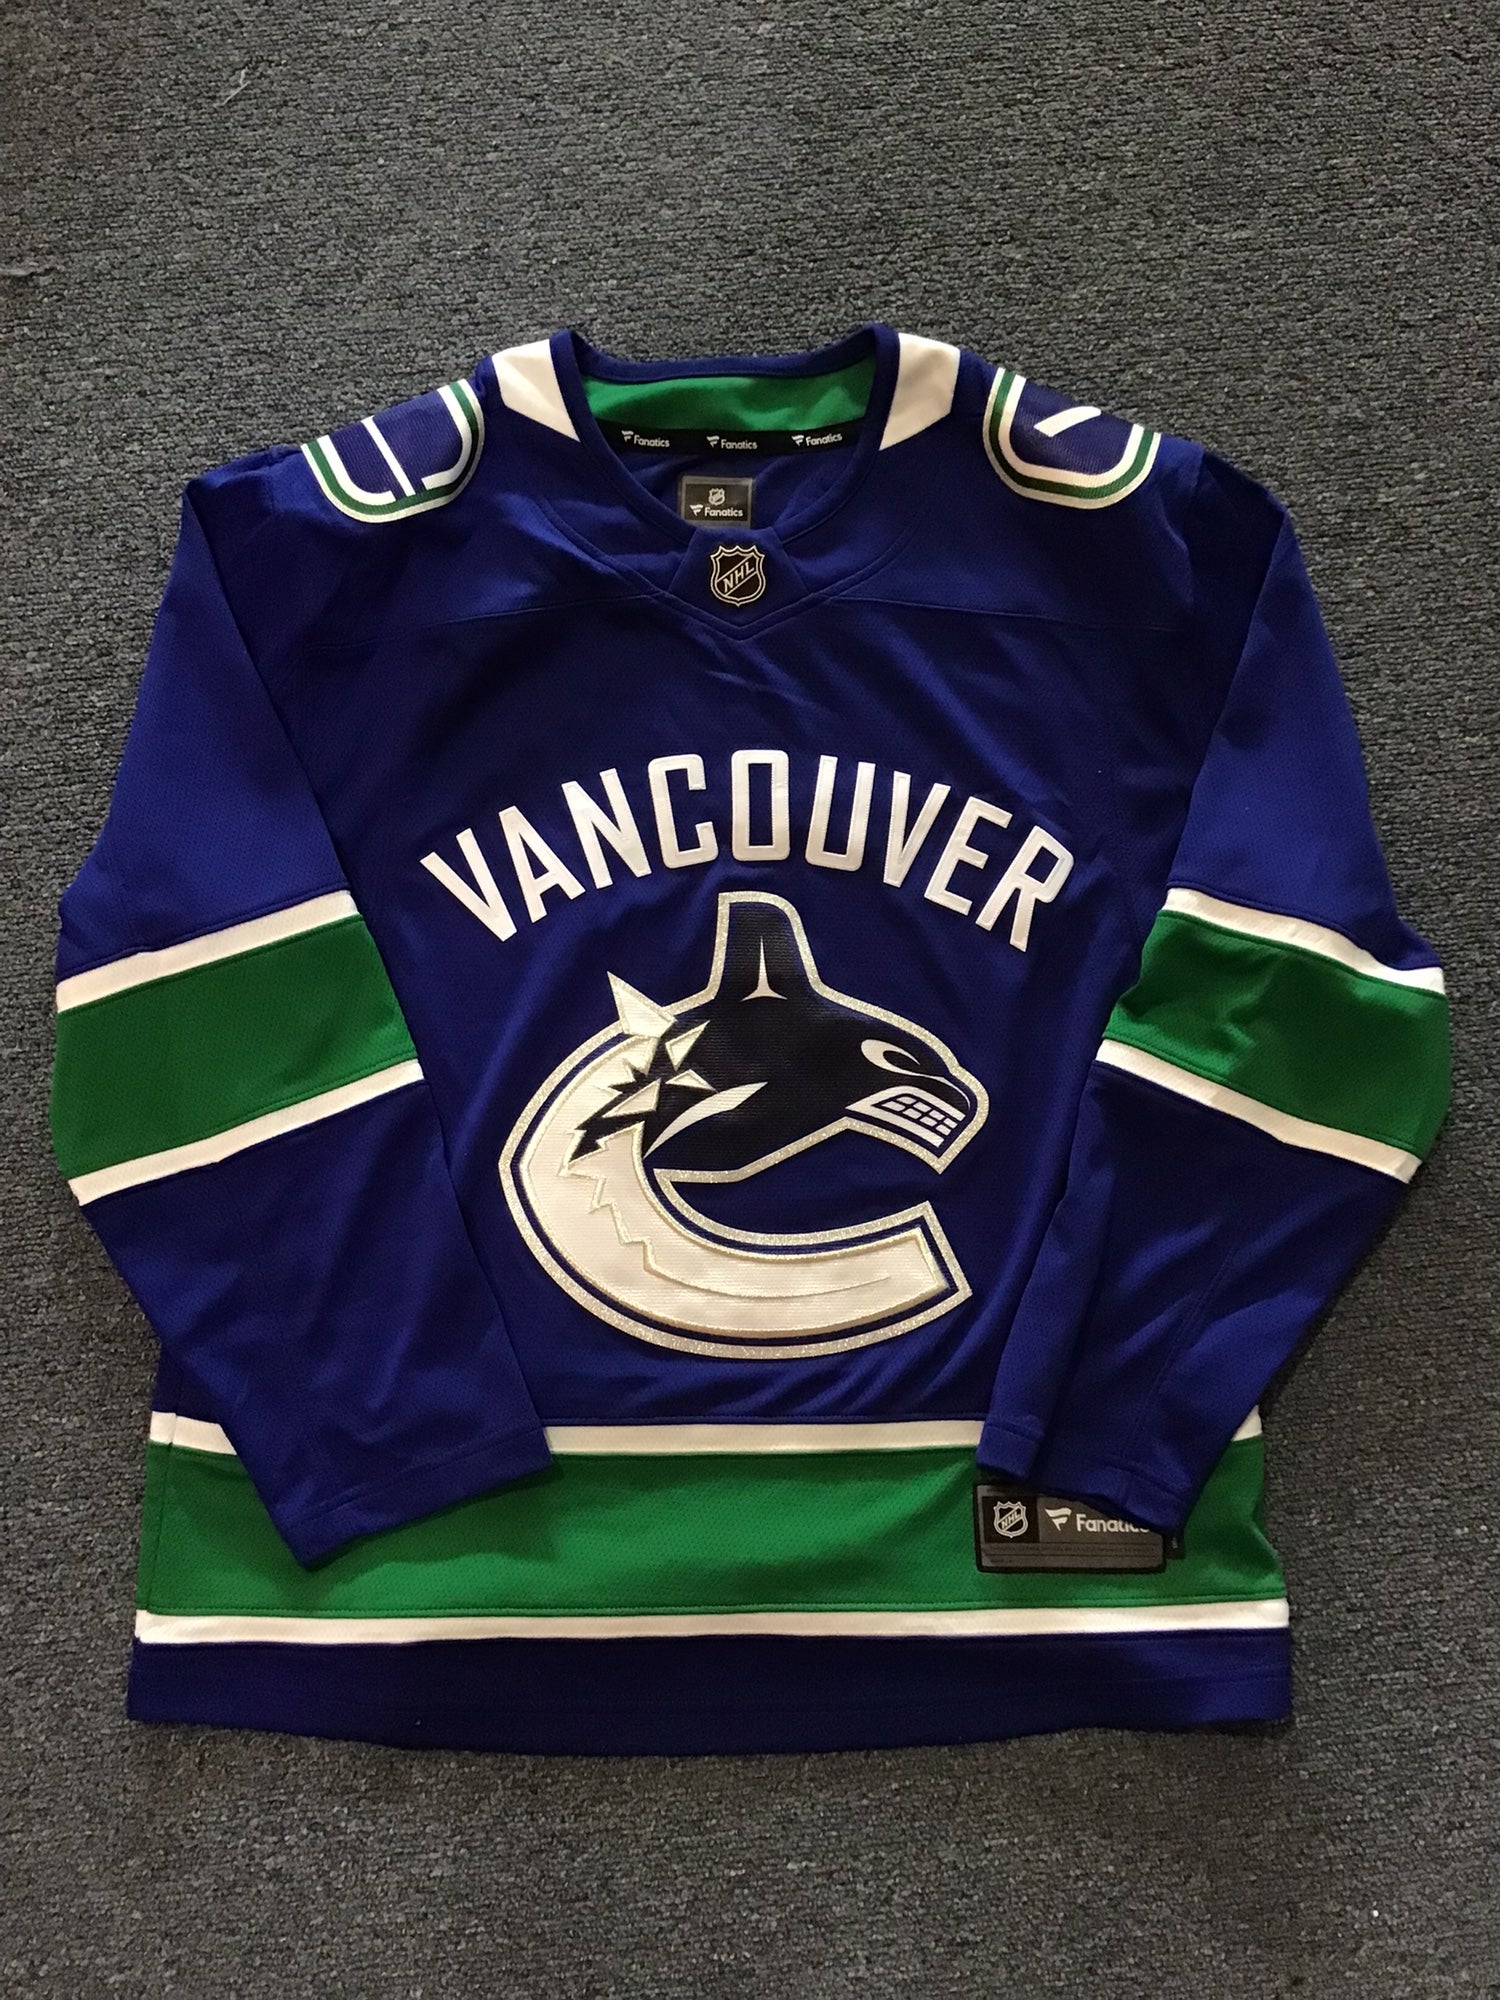 Vintage Vancouver Canucks Starter Hockey Jersey NWT – For All To Envy